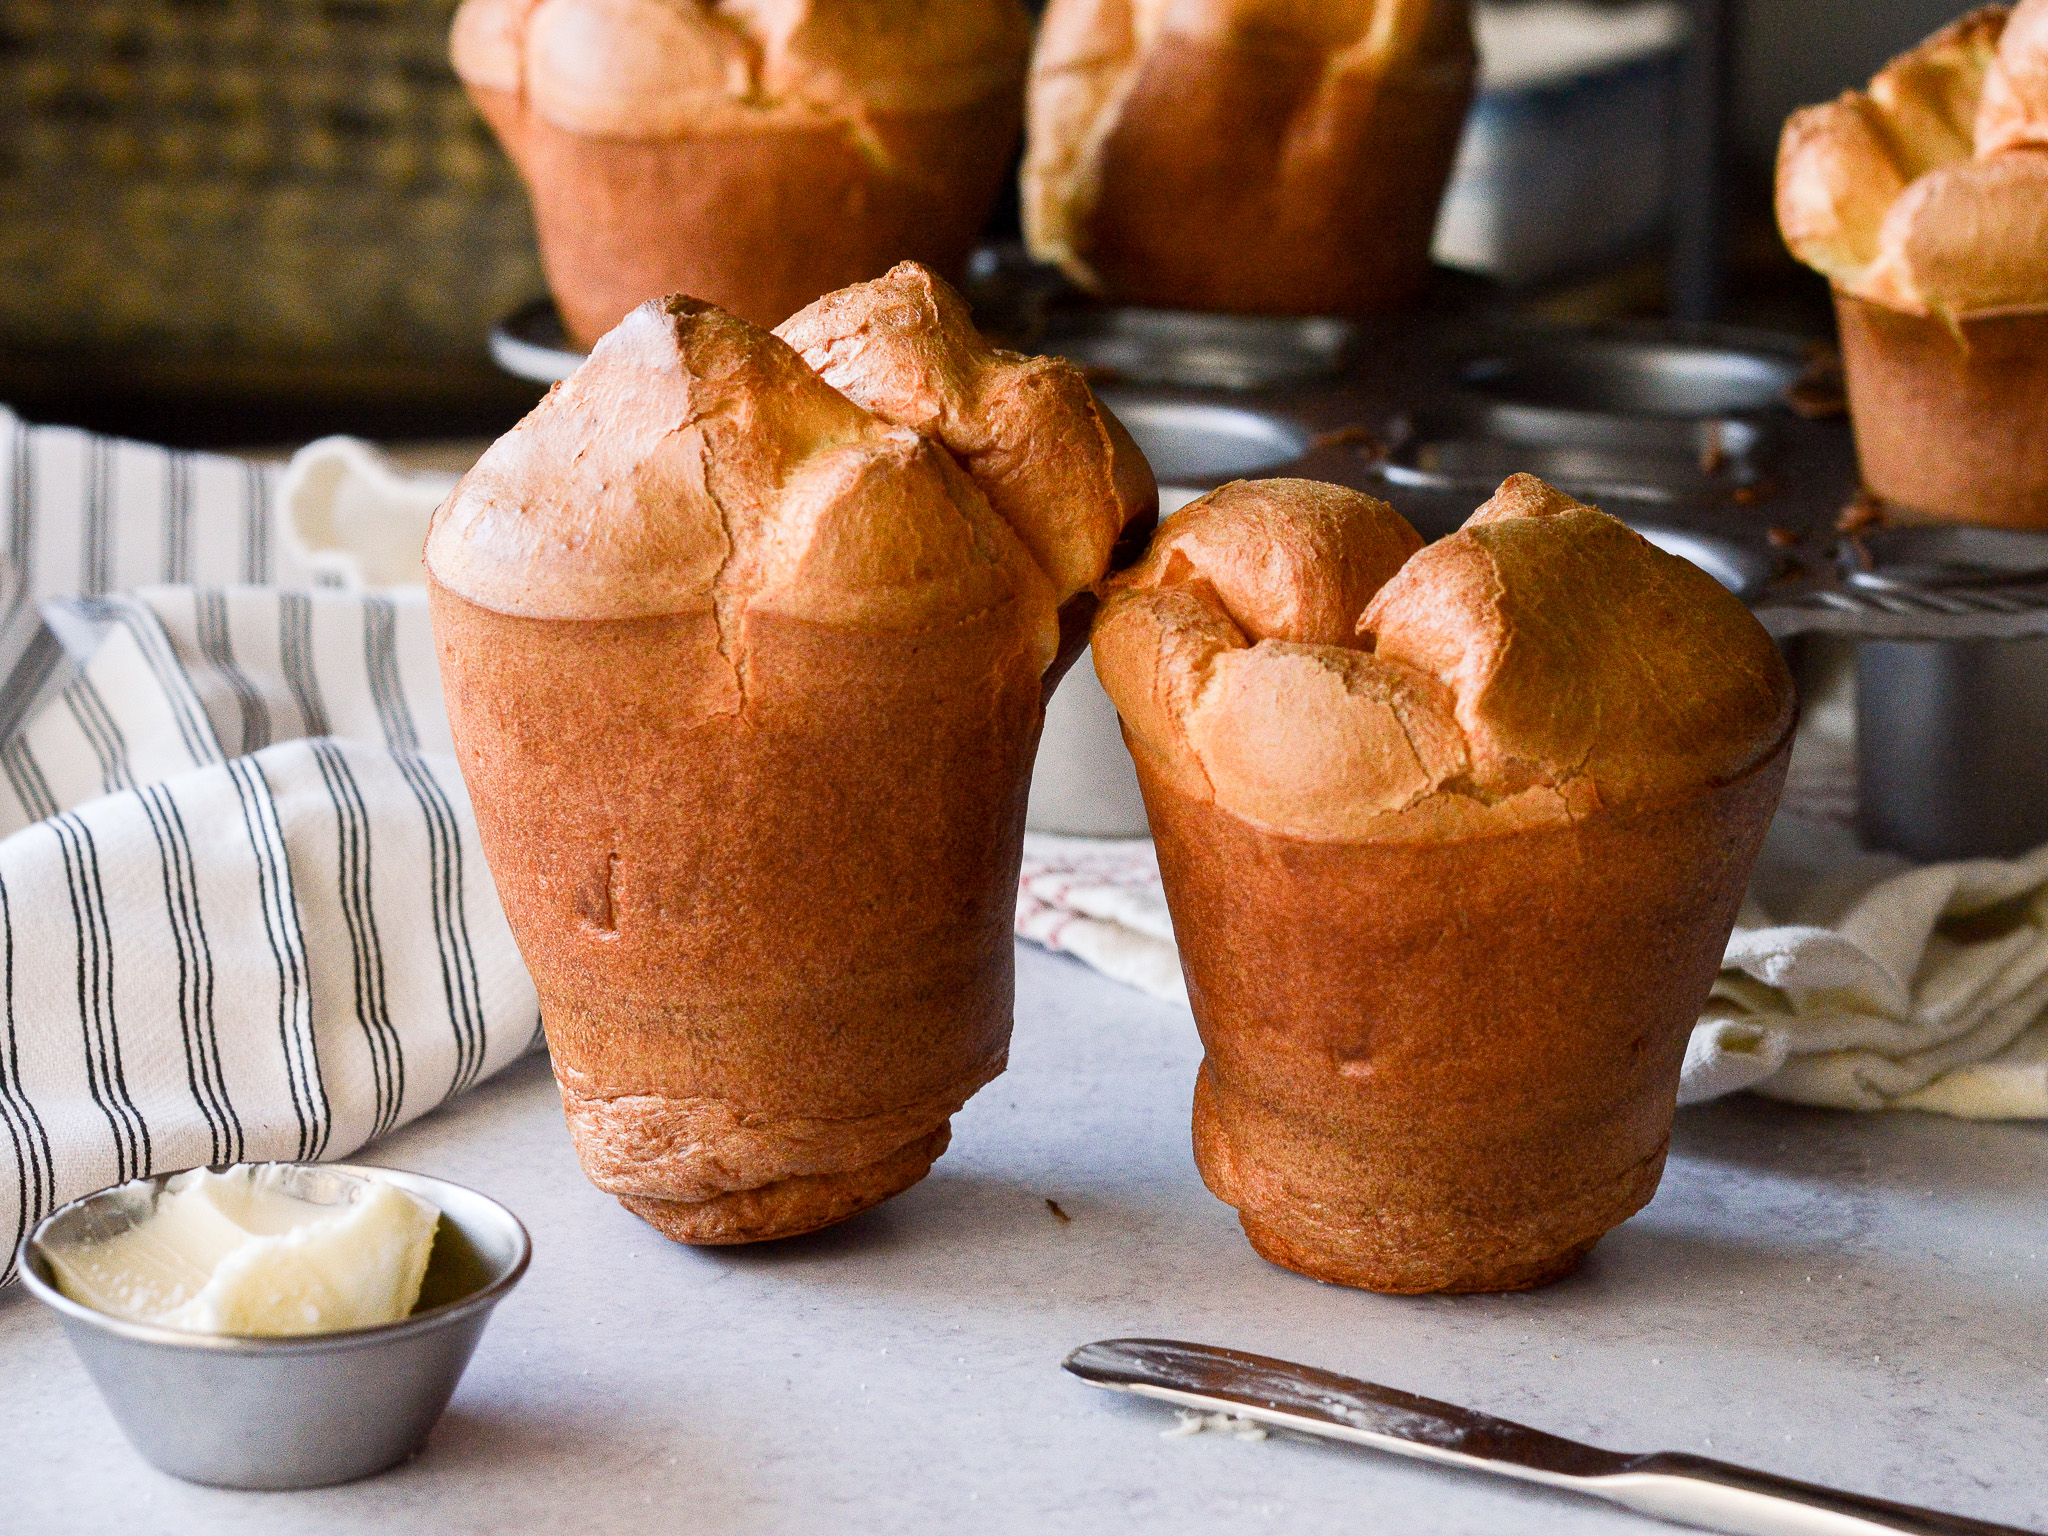 Two popovers side by side, one tall and completely risen, and one much shorter. 